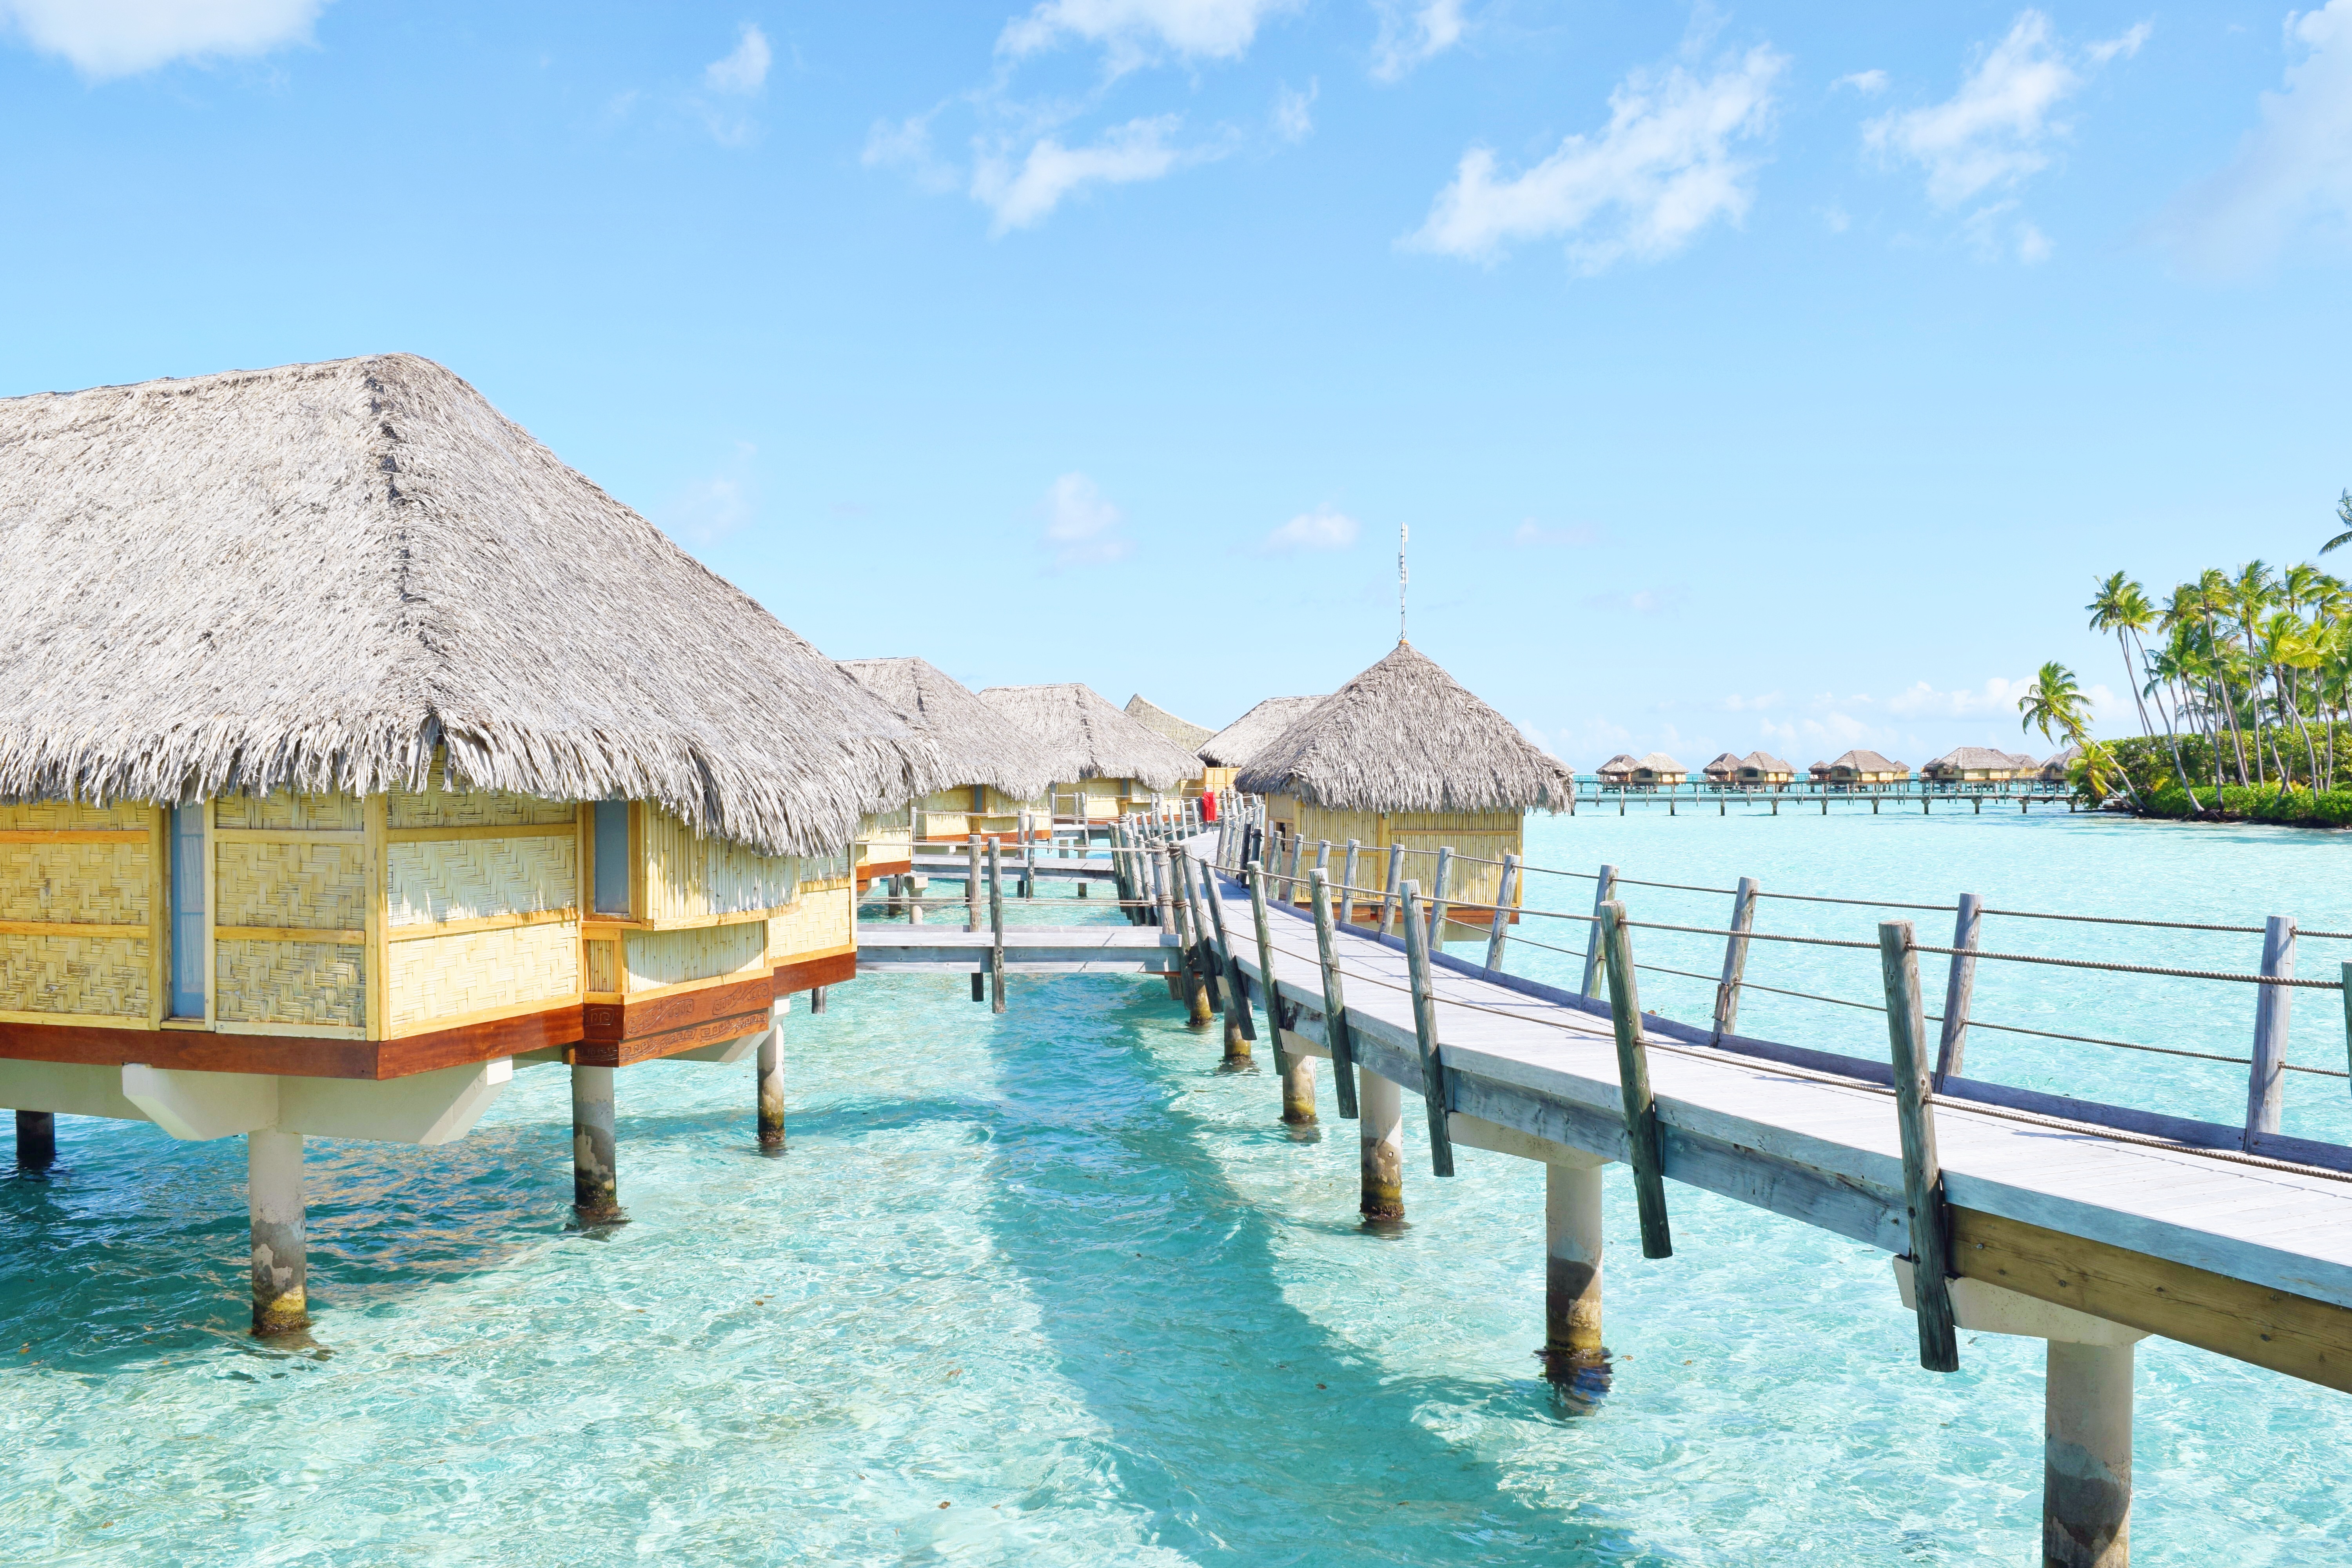 FAQ: Planning A Trip To French Polynesia - Tahiti - Bora Bora - Everything you need to know before you book a trip to Tahiti - Tahiti On A Budget - Tahiti Honeymoon - Things To Do In French Polynesia - Moorea - Overwater Bungalow - How Much Does Bora Bora Cost - Travel to Tahiti - Communikait by Kait Hanson